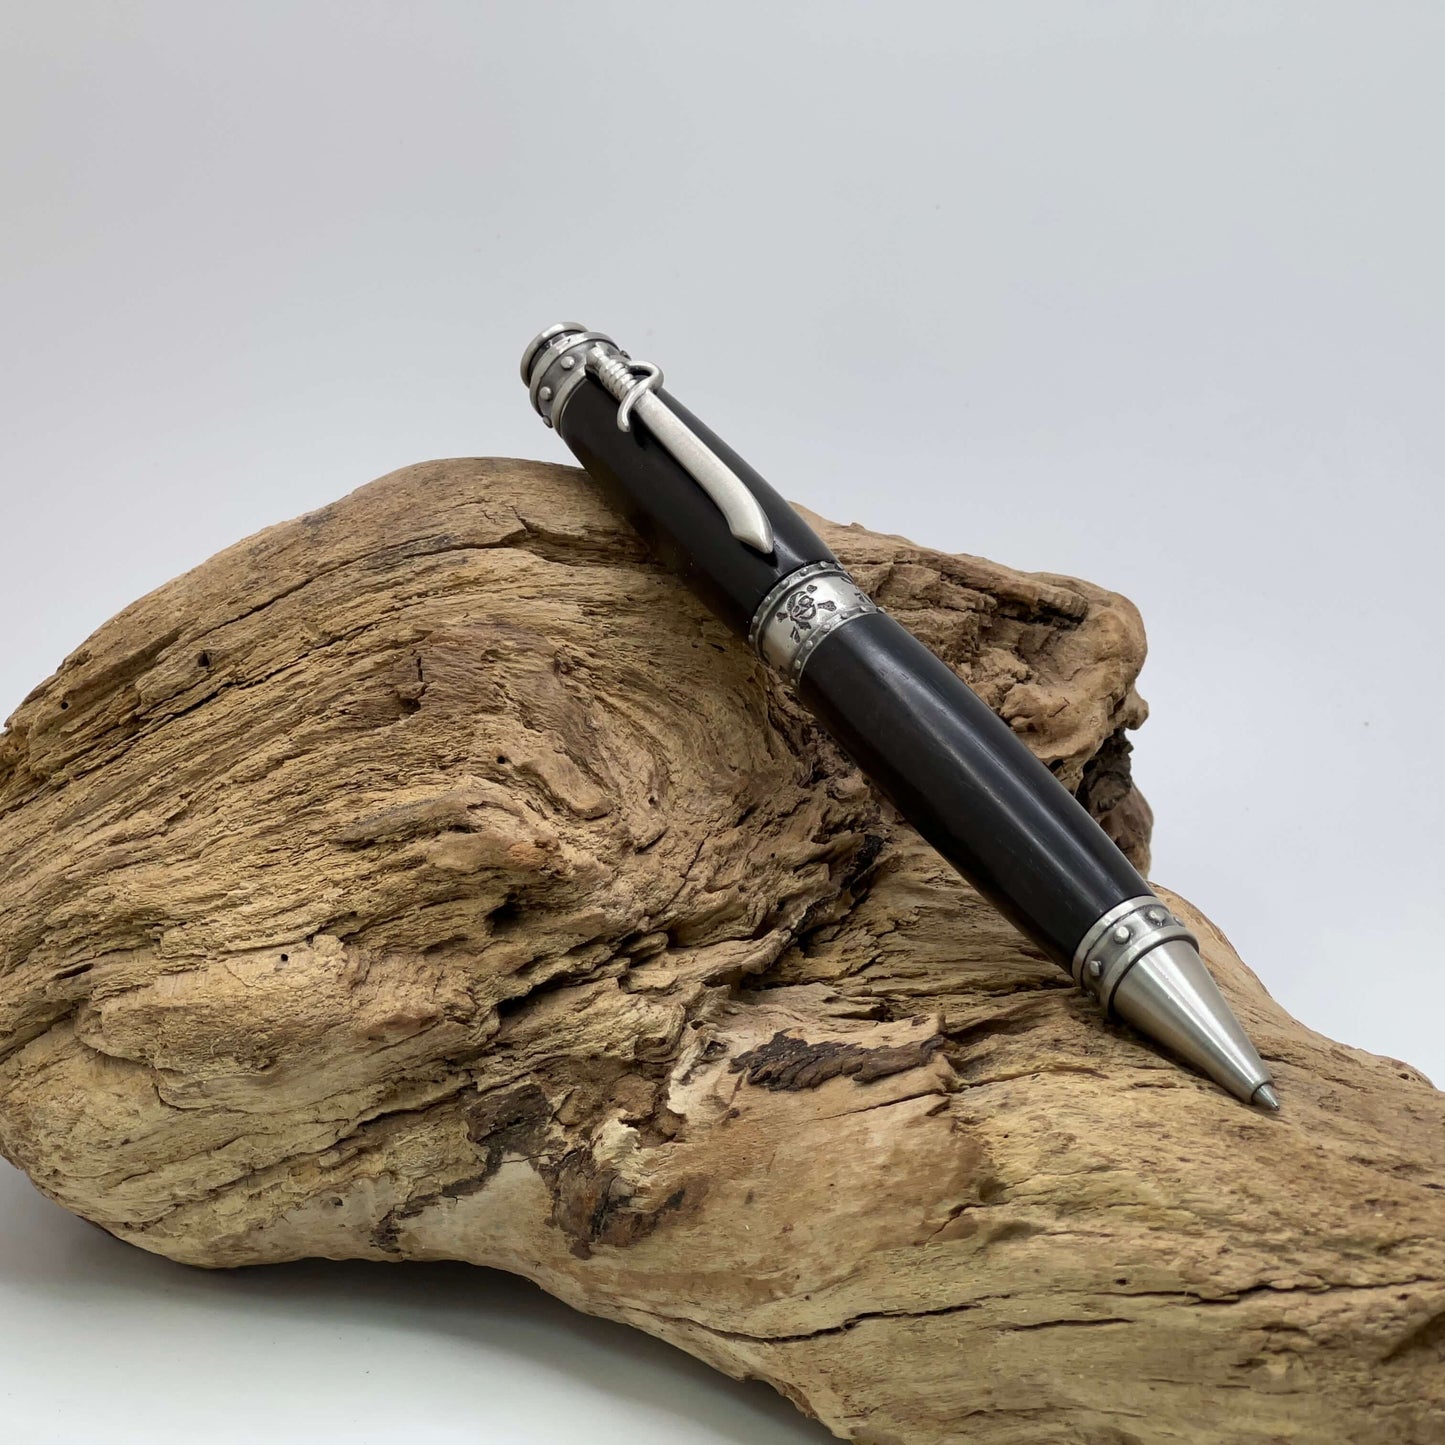 The Cutlass Handcrafted Pen With Ebony Wood